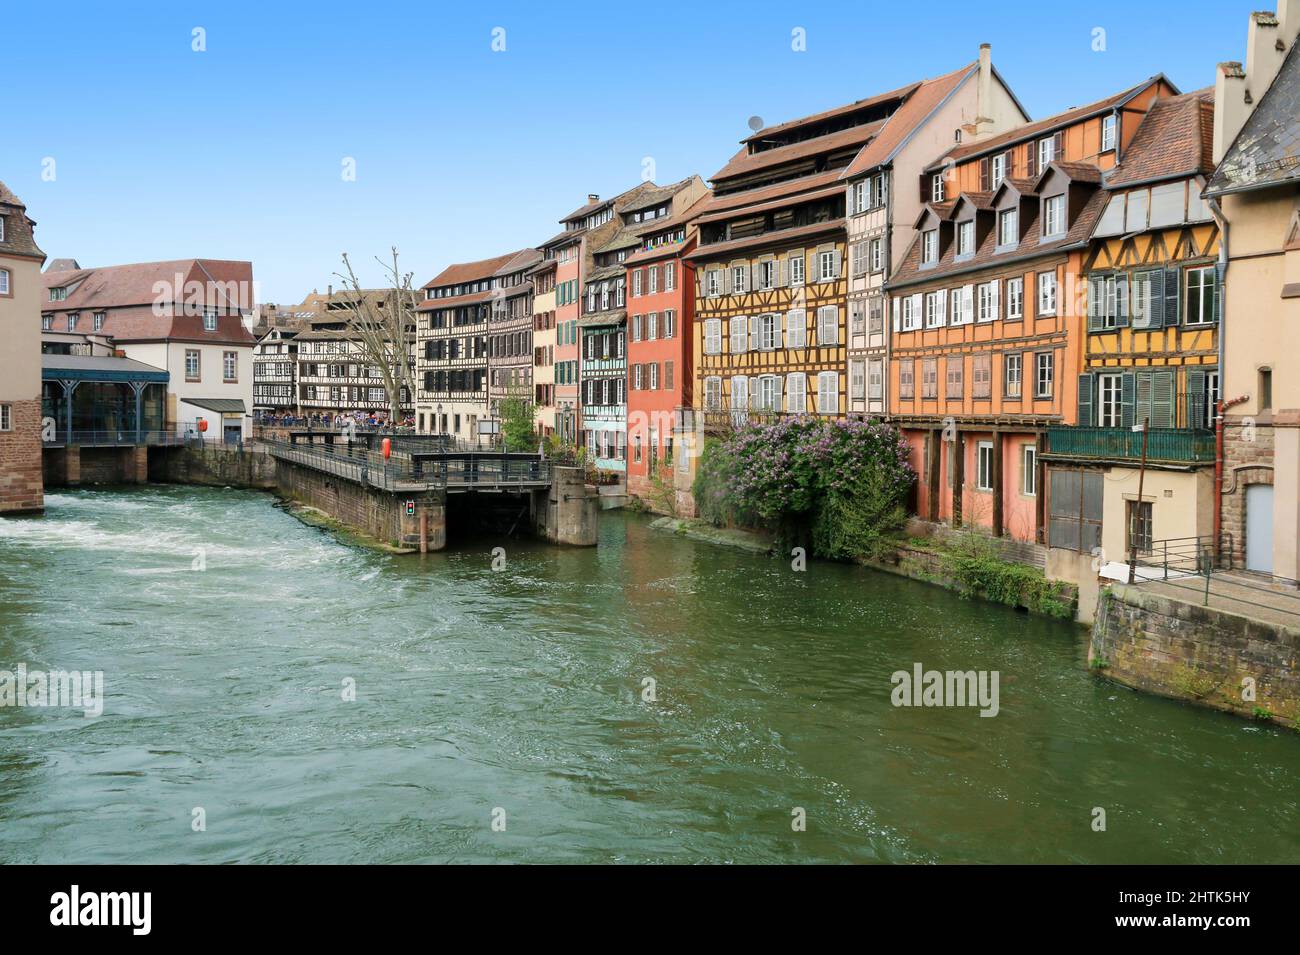 Entrance to a lock of the Ill in the heart of Strasbourg. Stock Photo